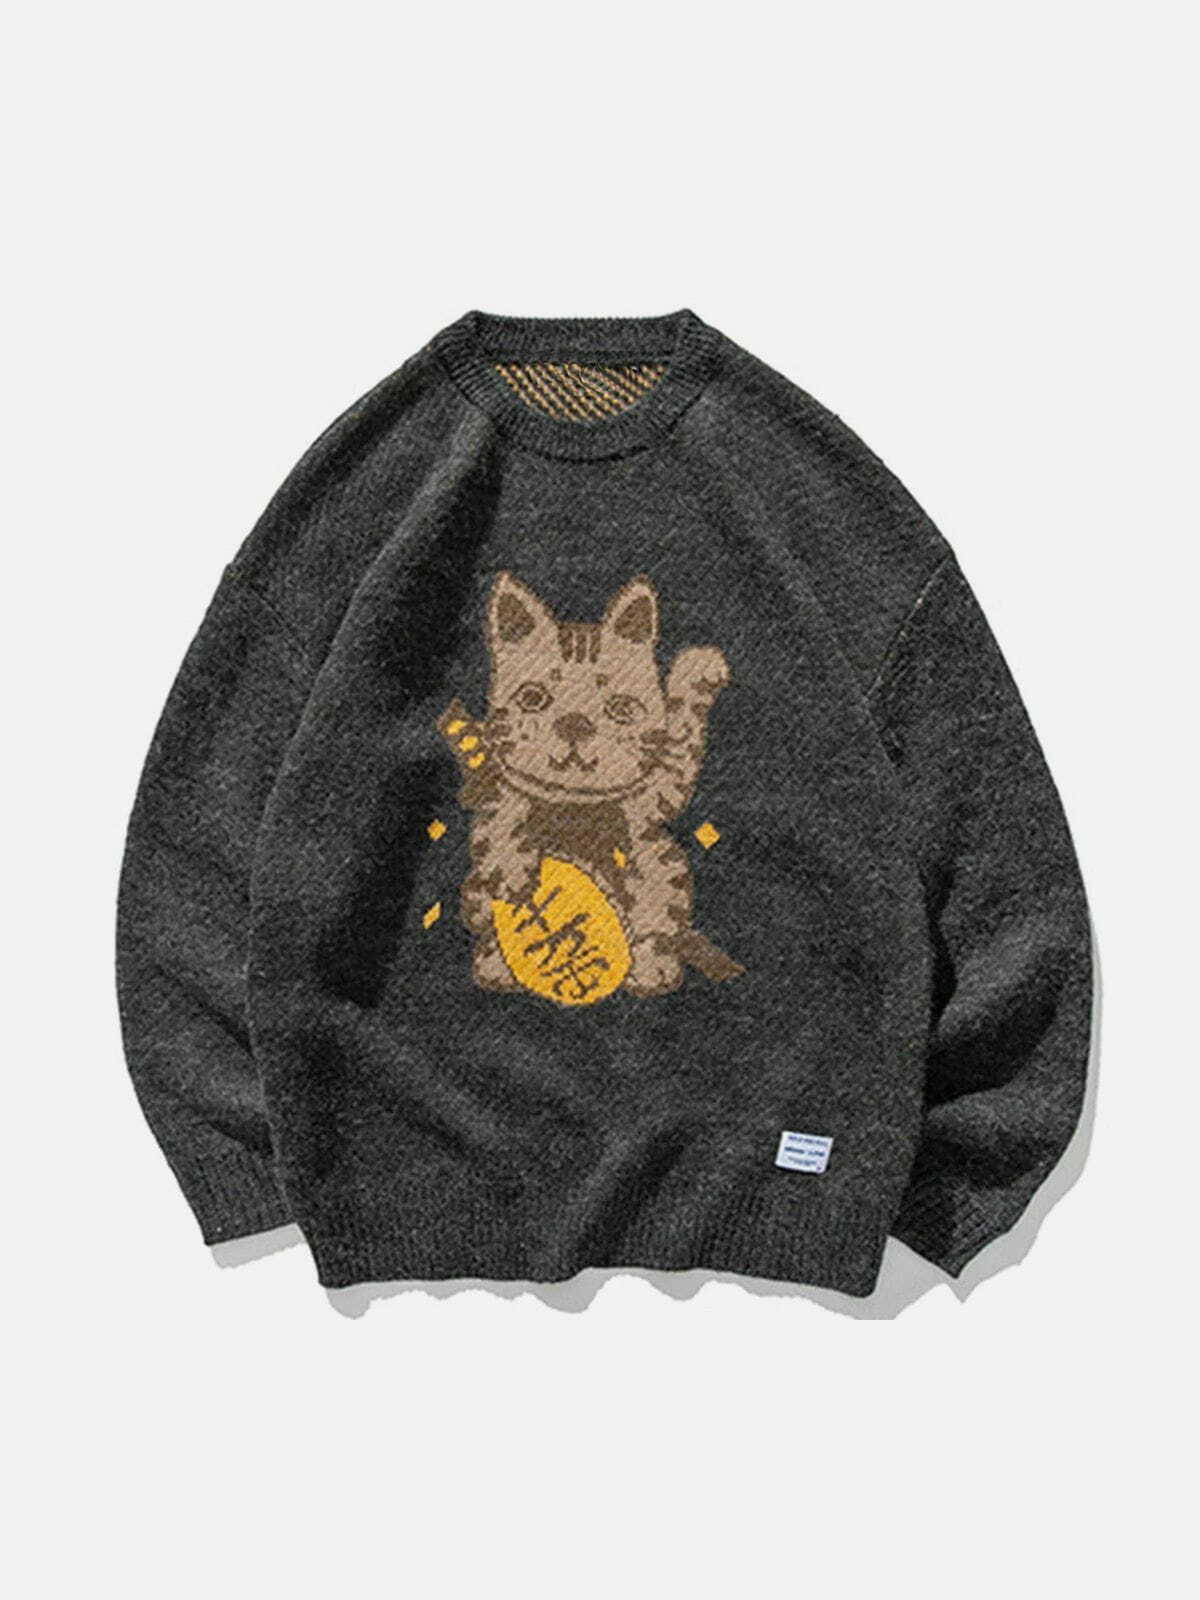 lucky cat knit sweater quirky & vibrant streetwear 7310